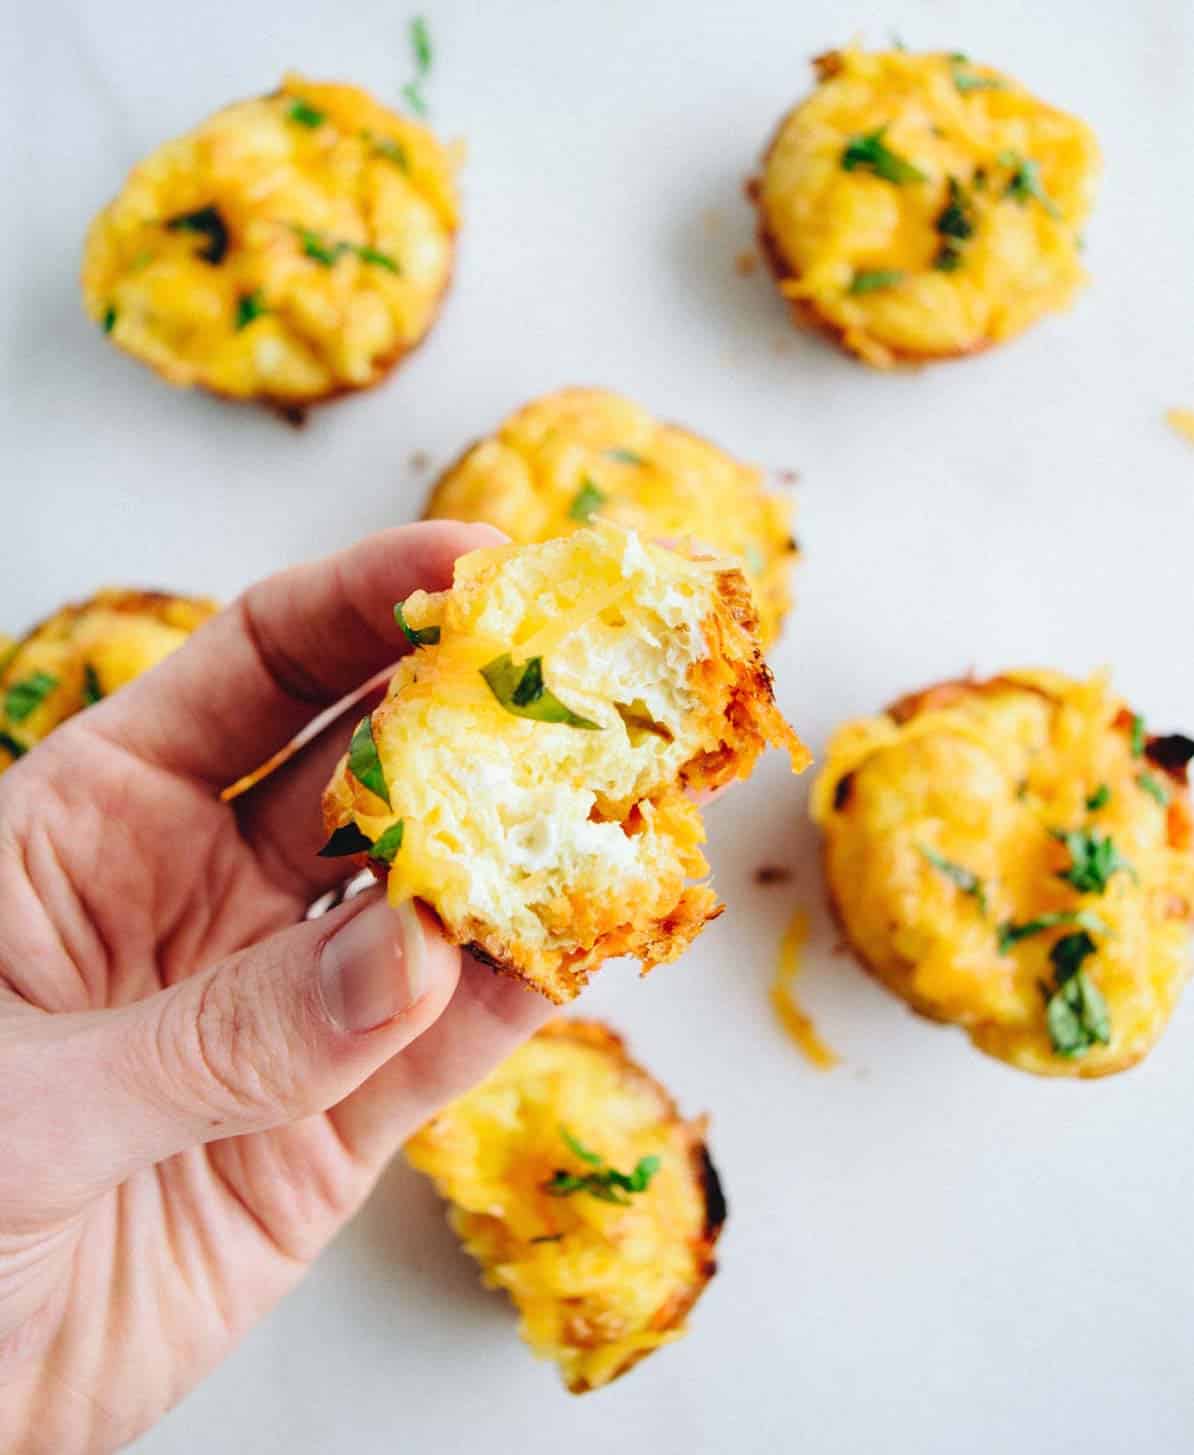 Make these yummy sweet potato egg cups with just a few ingredients including tater tots!